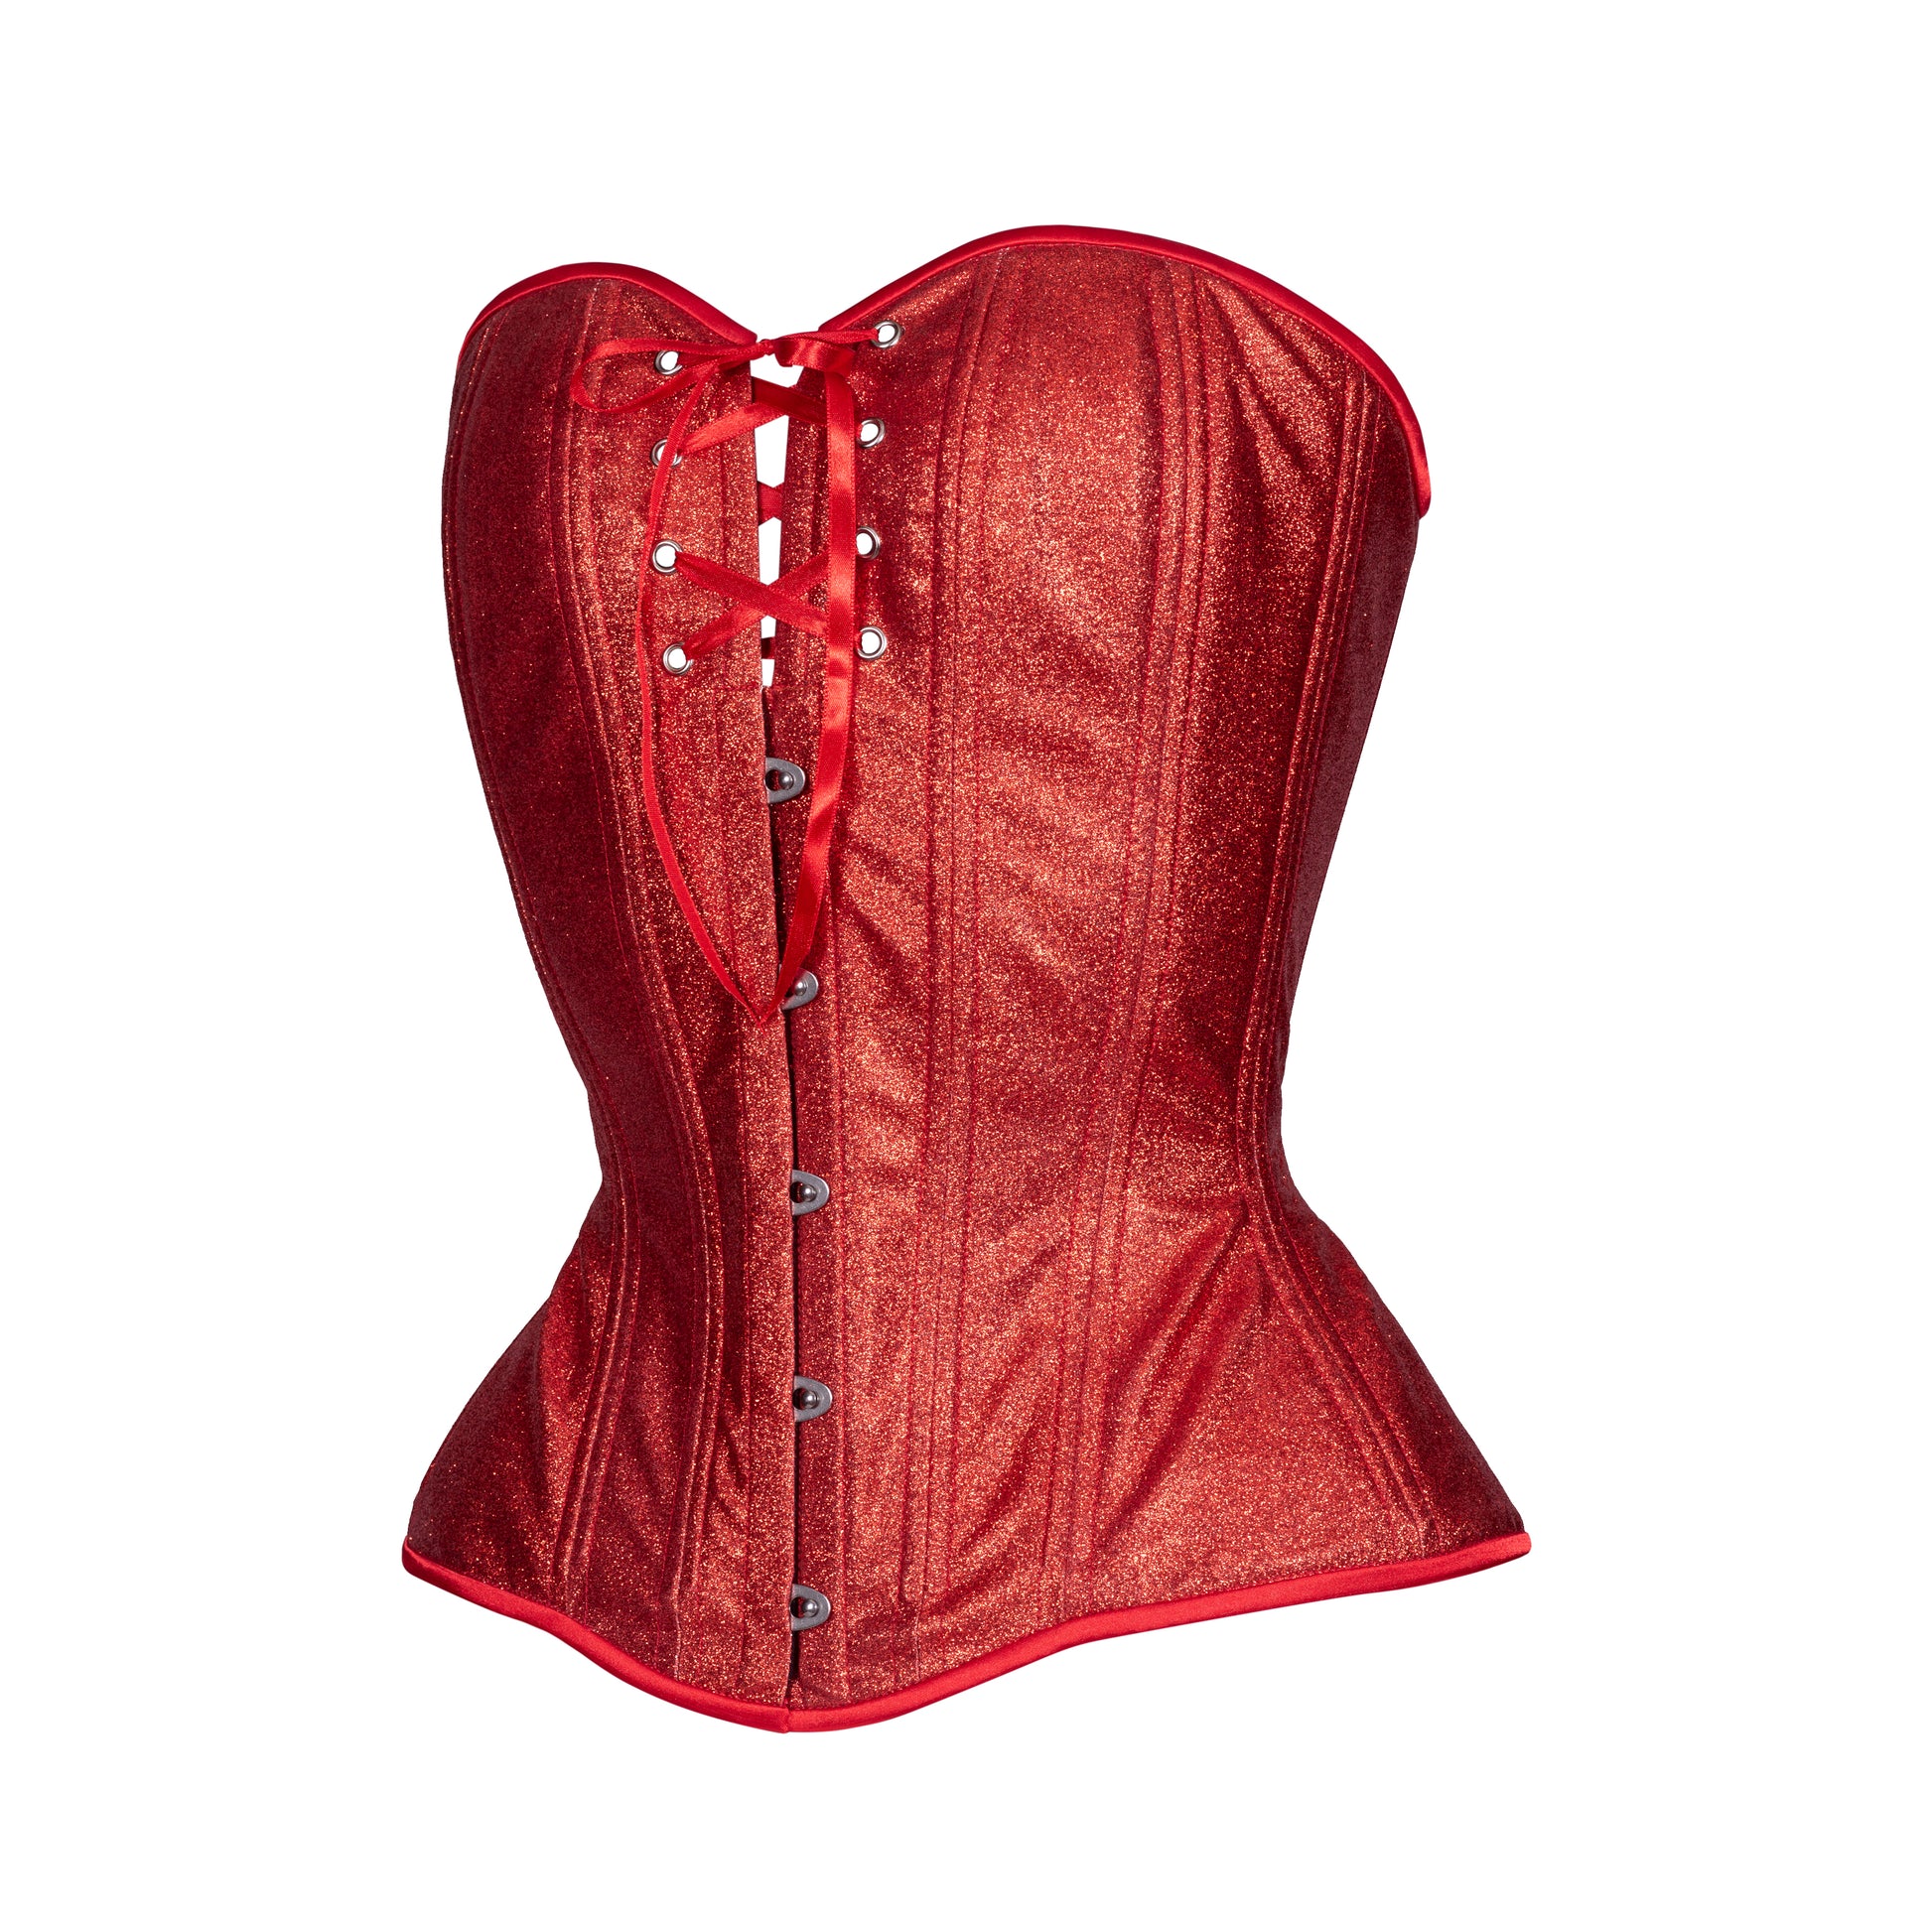 Strawberries and Lace Novice Corset, Hourglass Silhouette, Regular